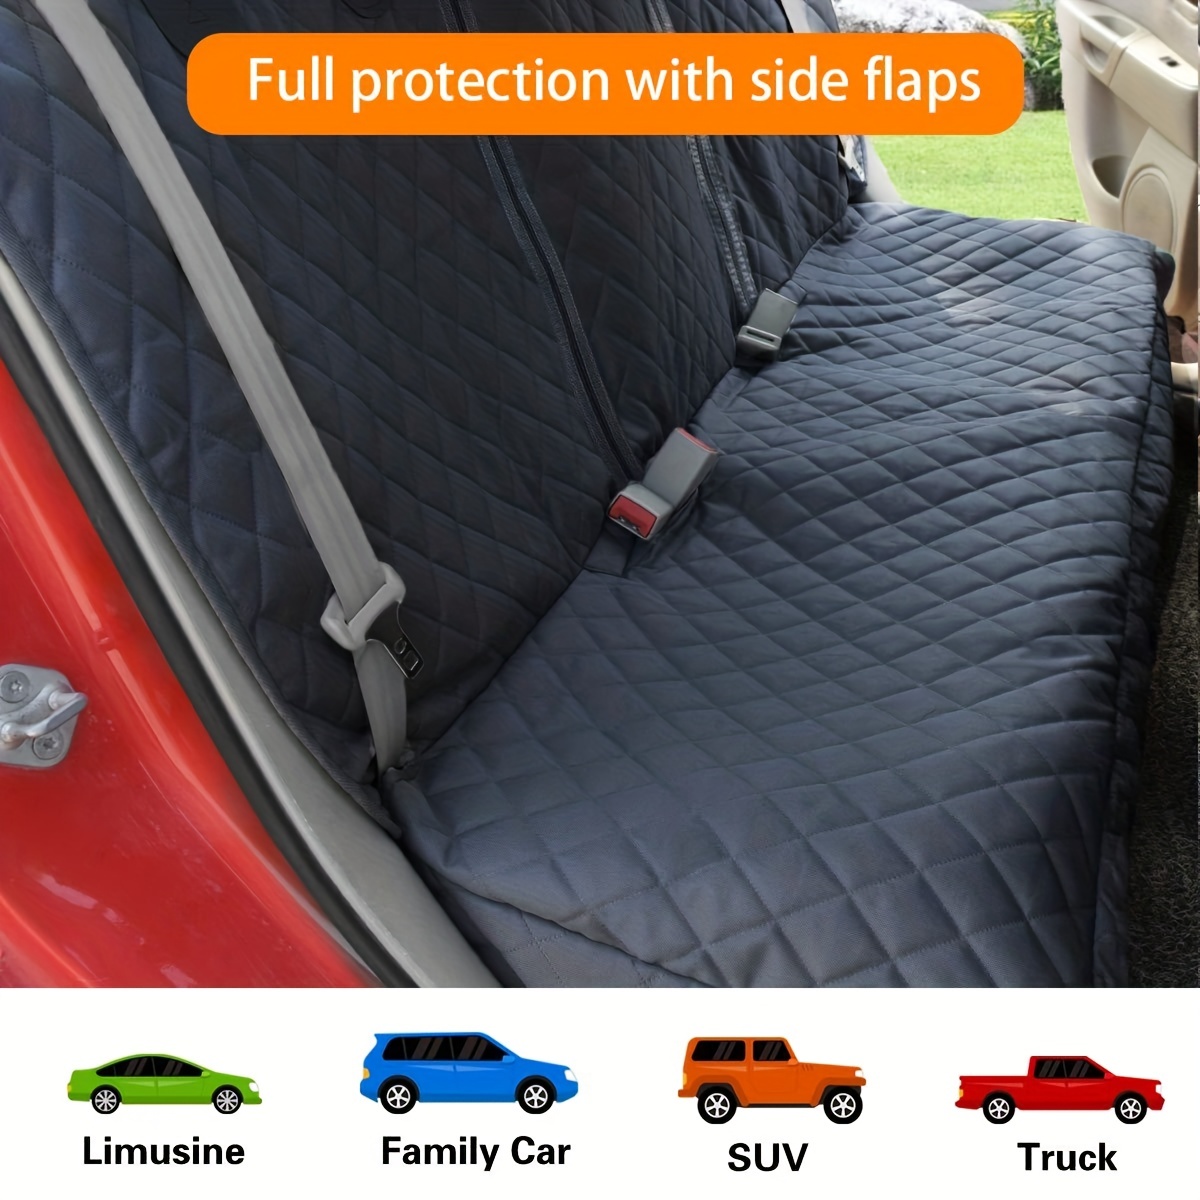 Tomeusey Feather Waterproof Seat Cover Car Accessories for Vehicle Trucks  Van SUV,Easy to Install Car Seat Cover